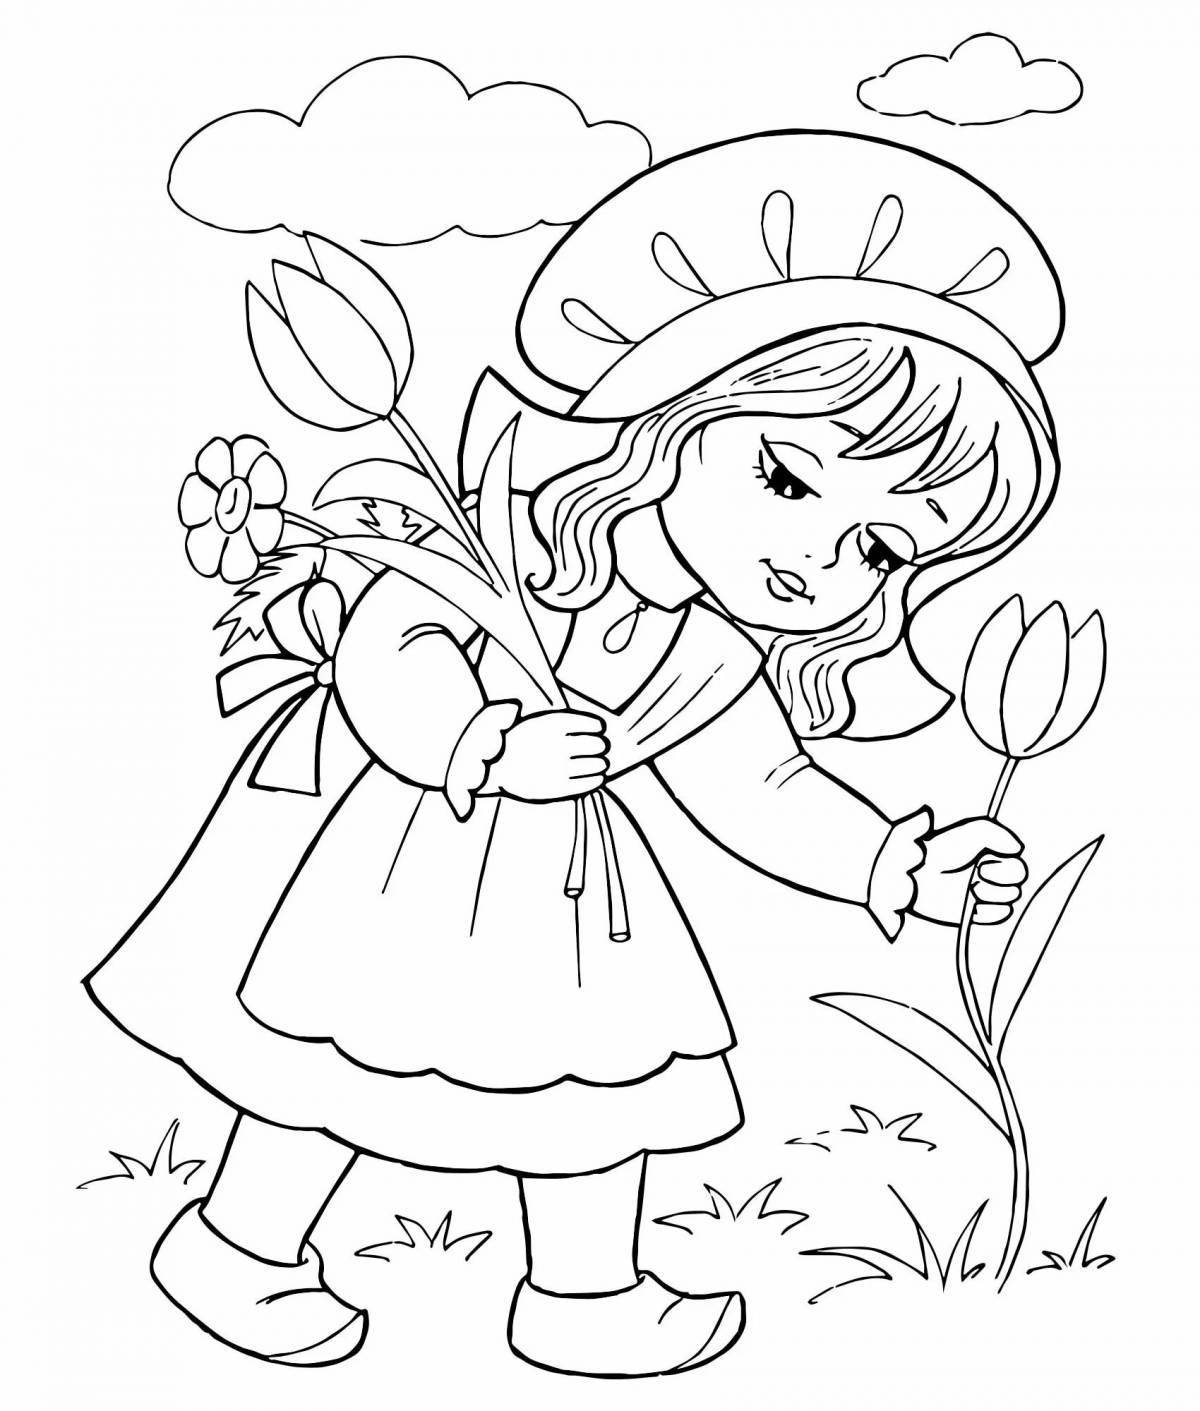 Bright little red riding hood coloring book